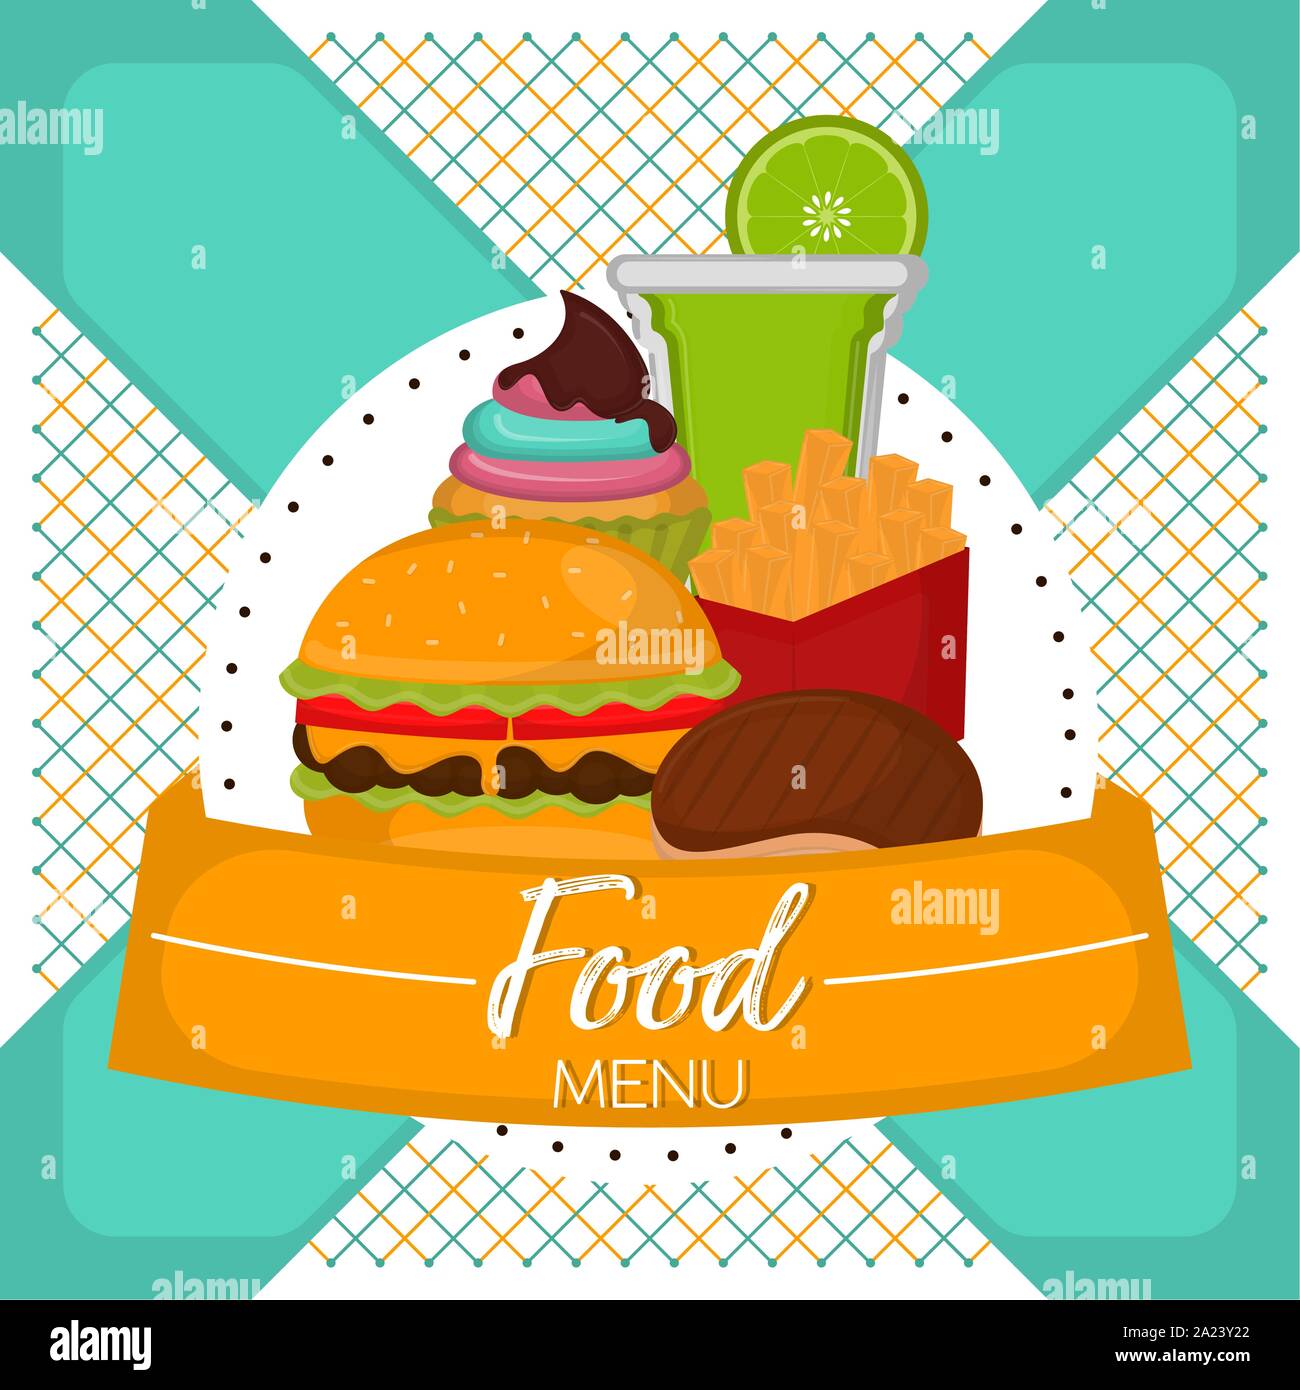 Food menu with a burguer, french fries, cupcake, lemon cocktail glass and meat steak - Vector Stock Vector